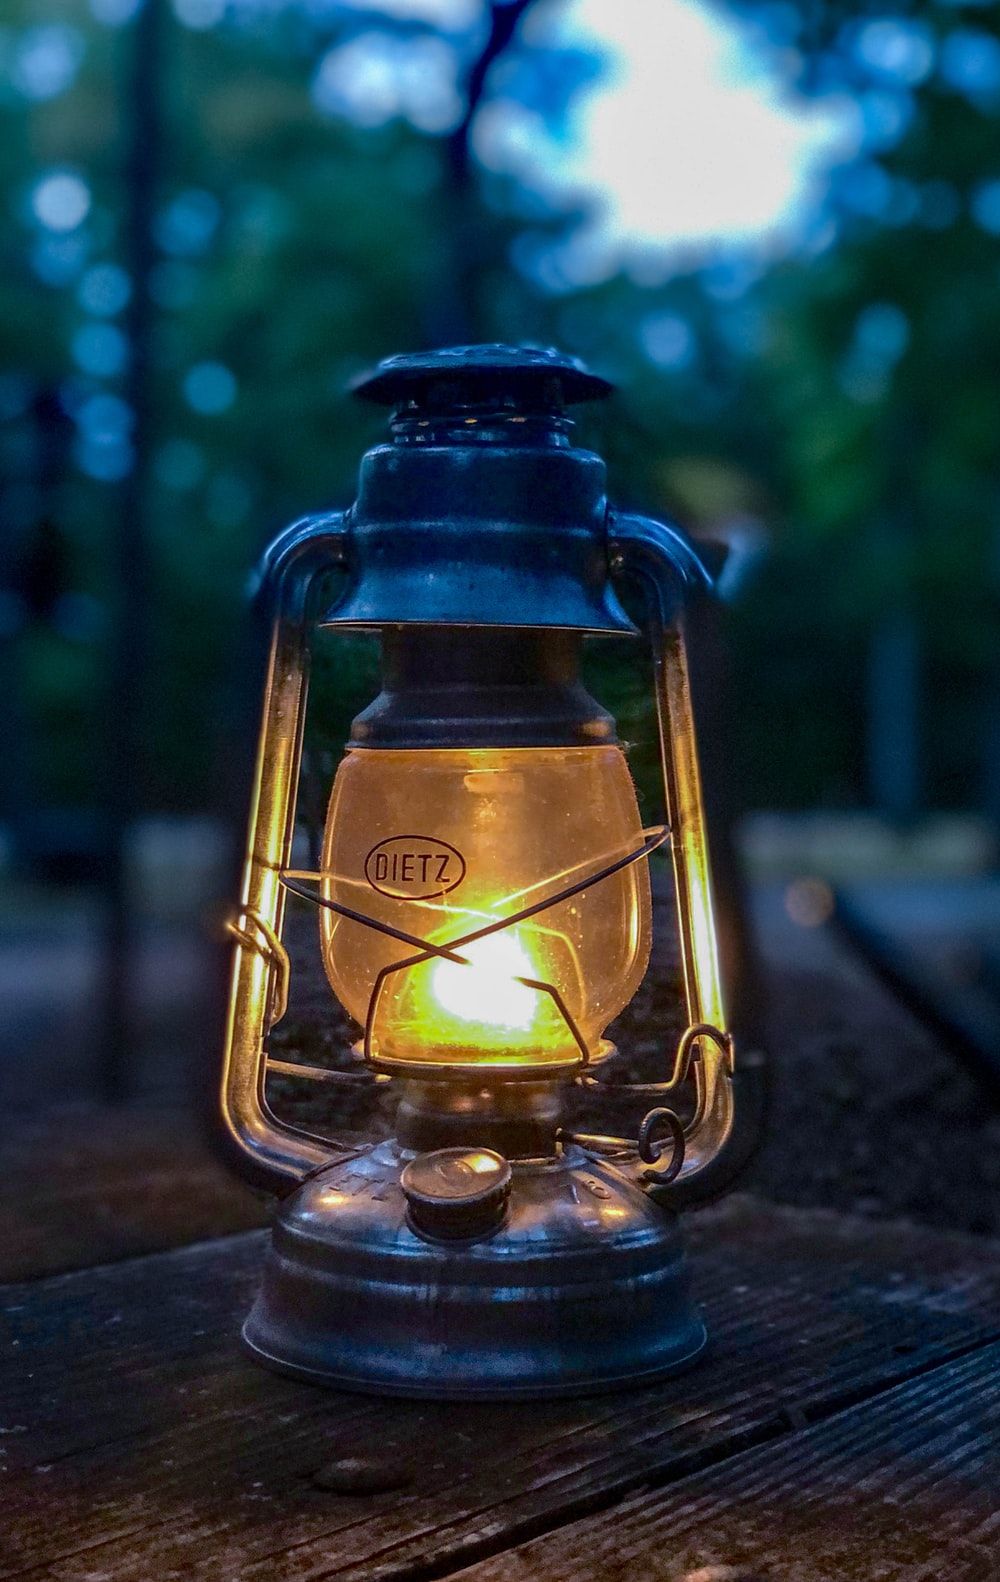 Oil Lamp Picture. Download Free Image